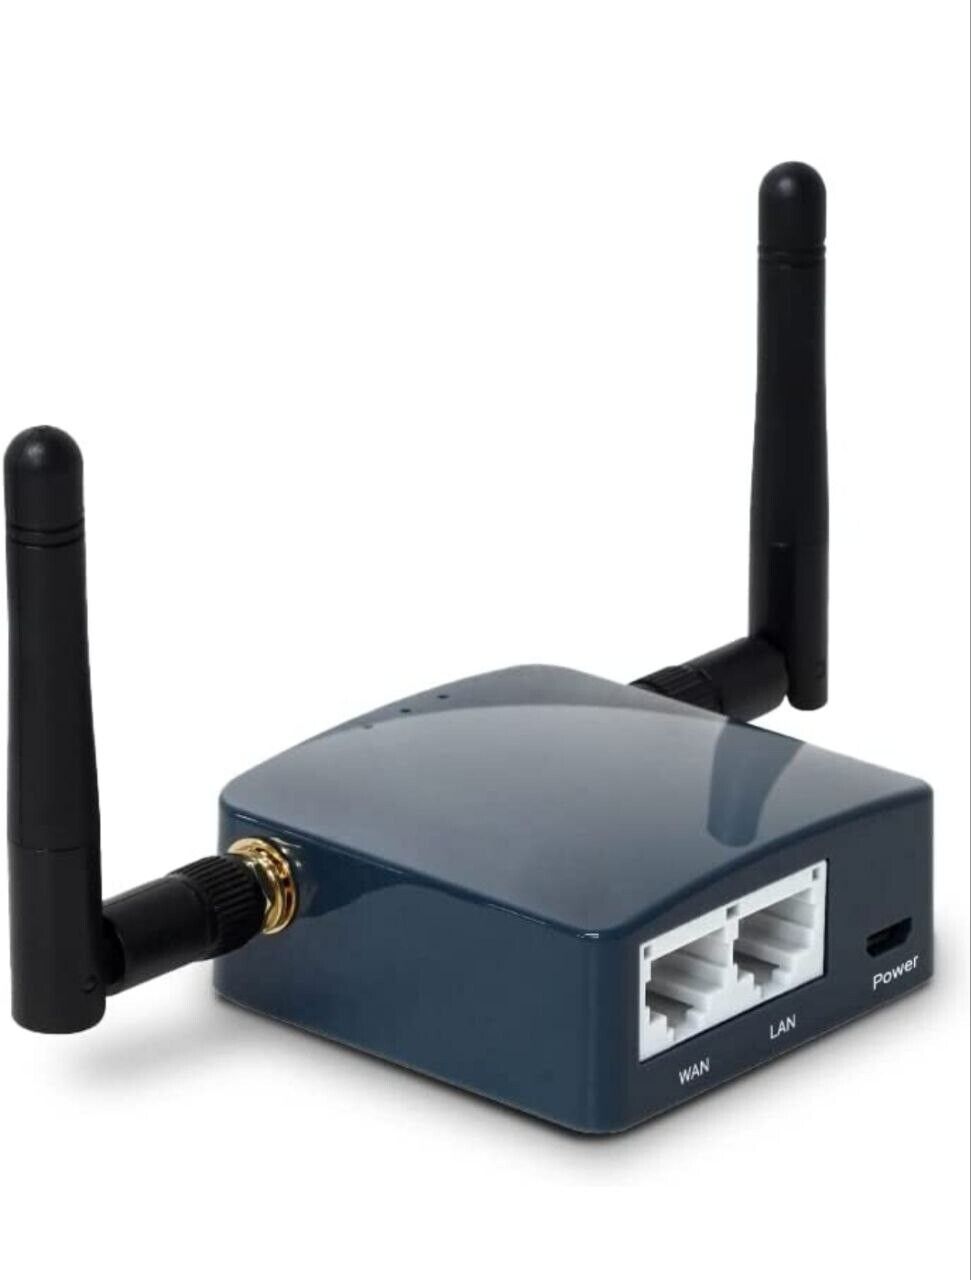 mini wifi router flashed unlocked for Hotspots. Bypasses throttling.  Slowdowns 